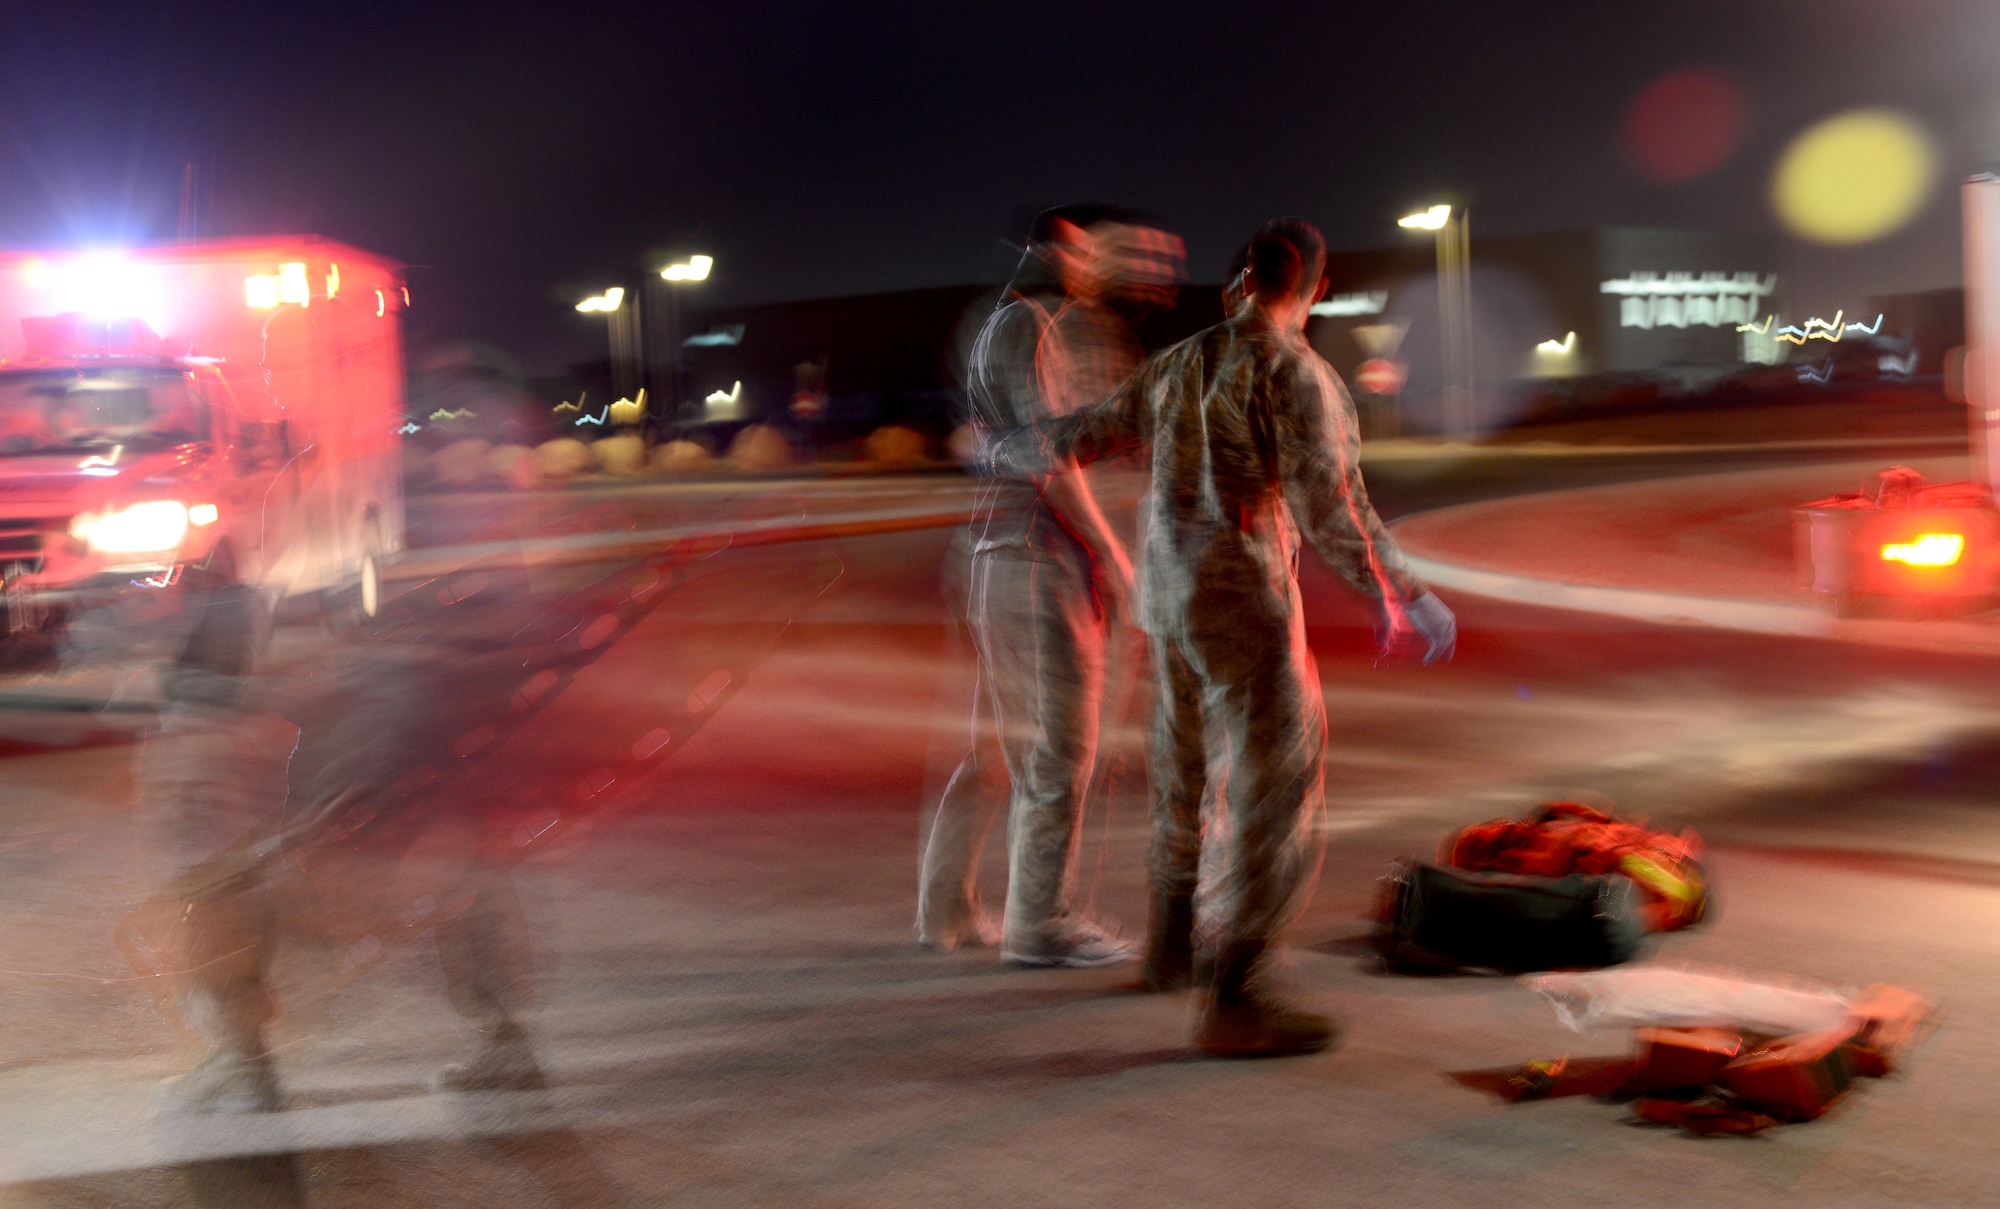 First responders rush to provide medical attention to simulated victims of a vehicle accident during a mass casualty exercise Nov. 10, 2014, at Al Udeid Air Base, Qatar. In this exercise, the victims were riding their bikes when a van collided with them. The training provided by these types of exercises keep Airmen ready to respond to real-world scenarios at a moment’s notice. (U.S. Air Force photo by Senior Airman Kia Atkins)